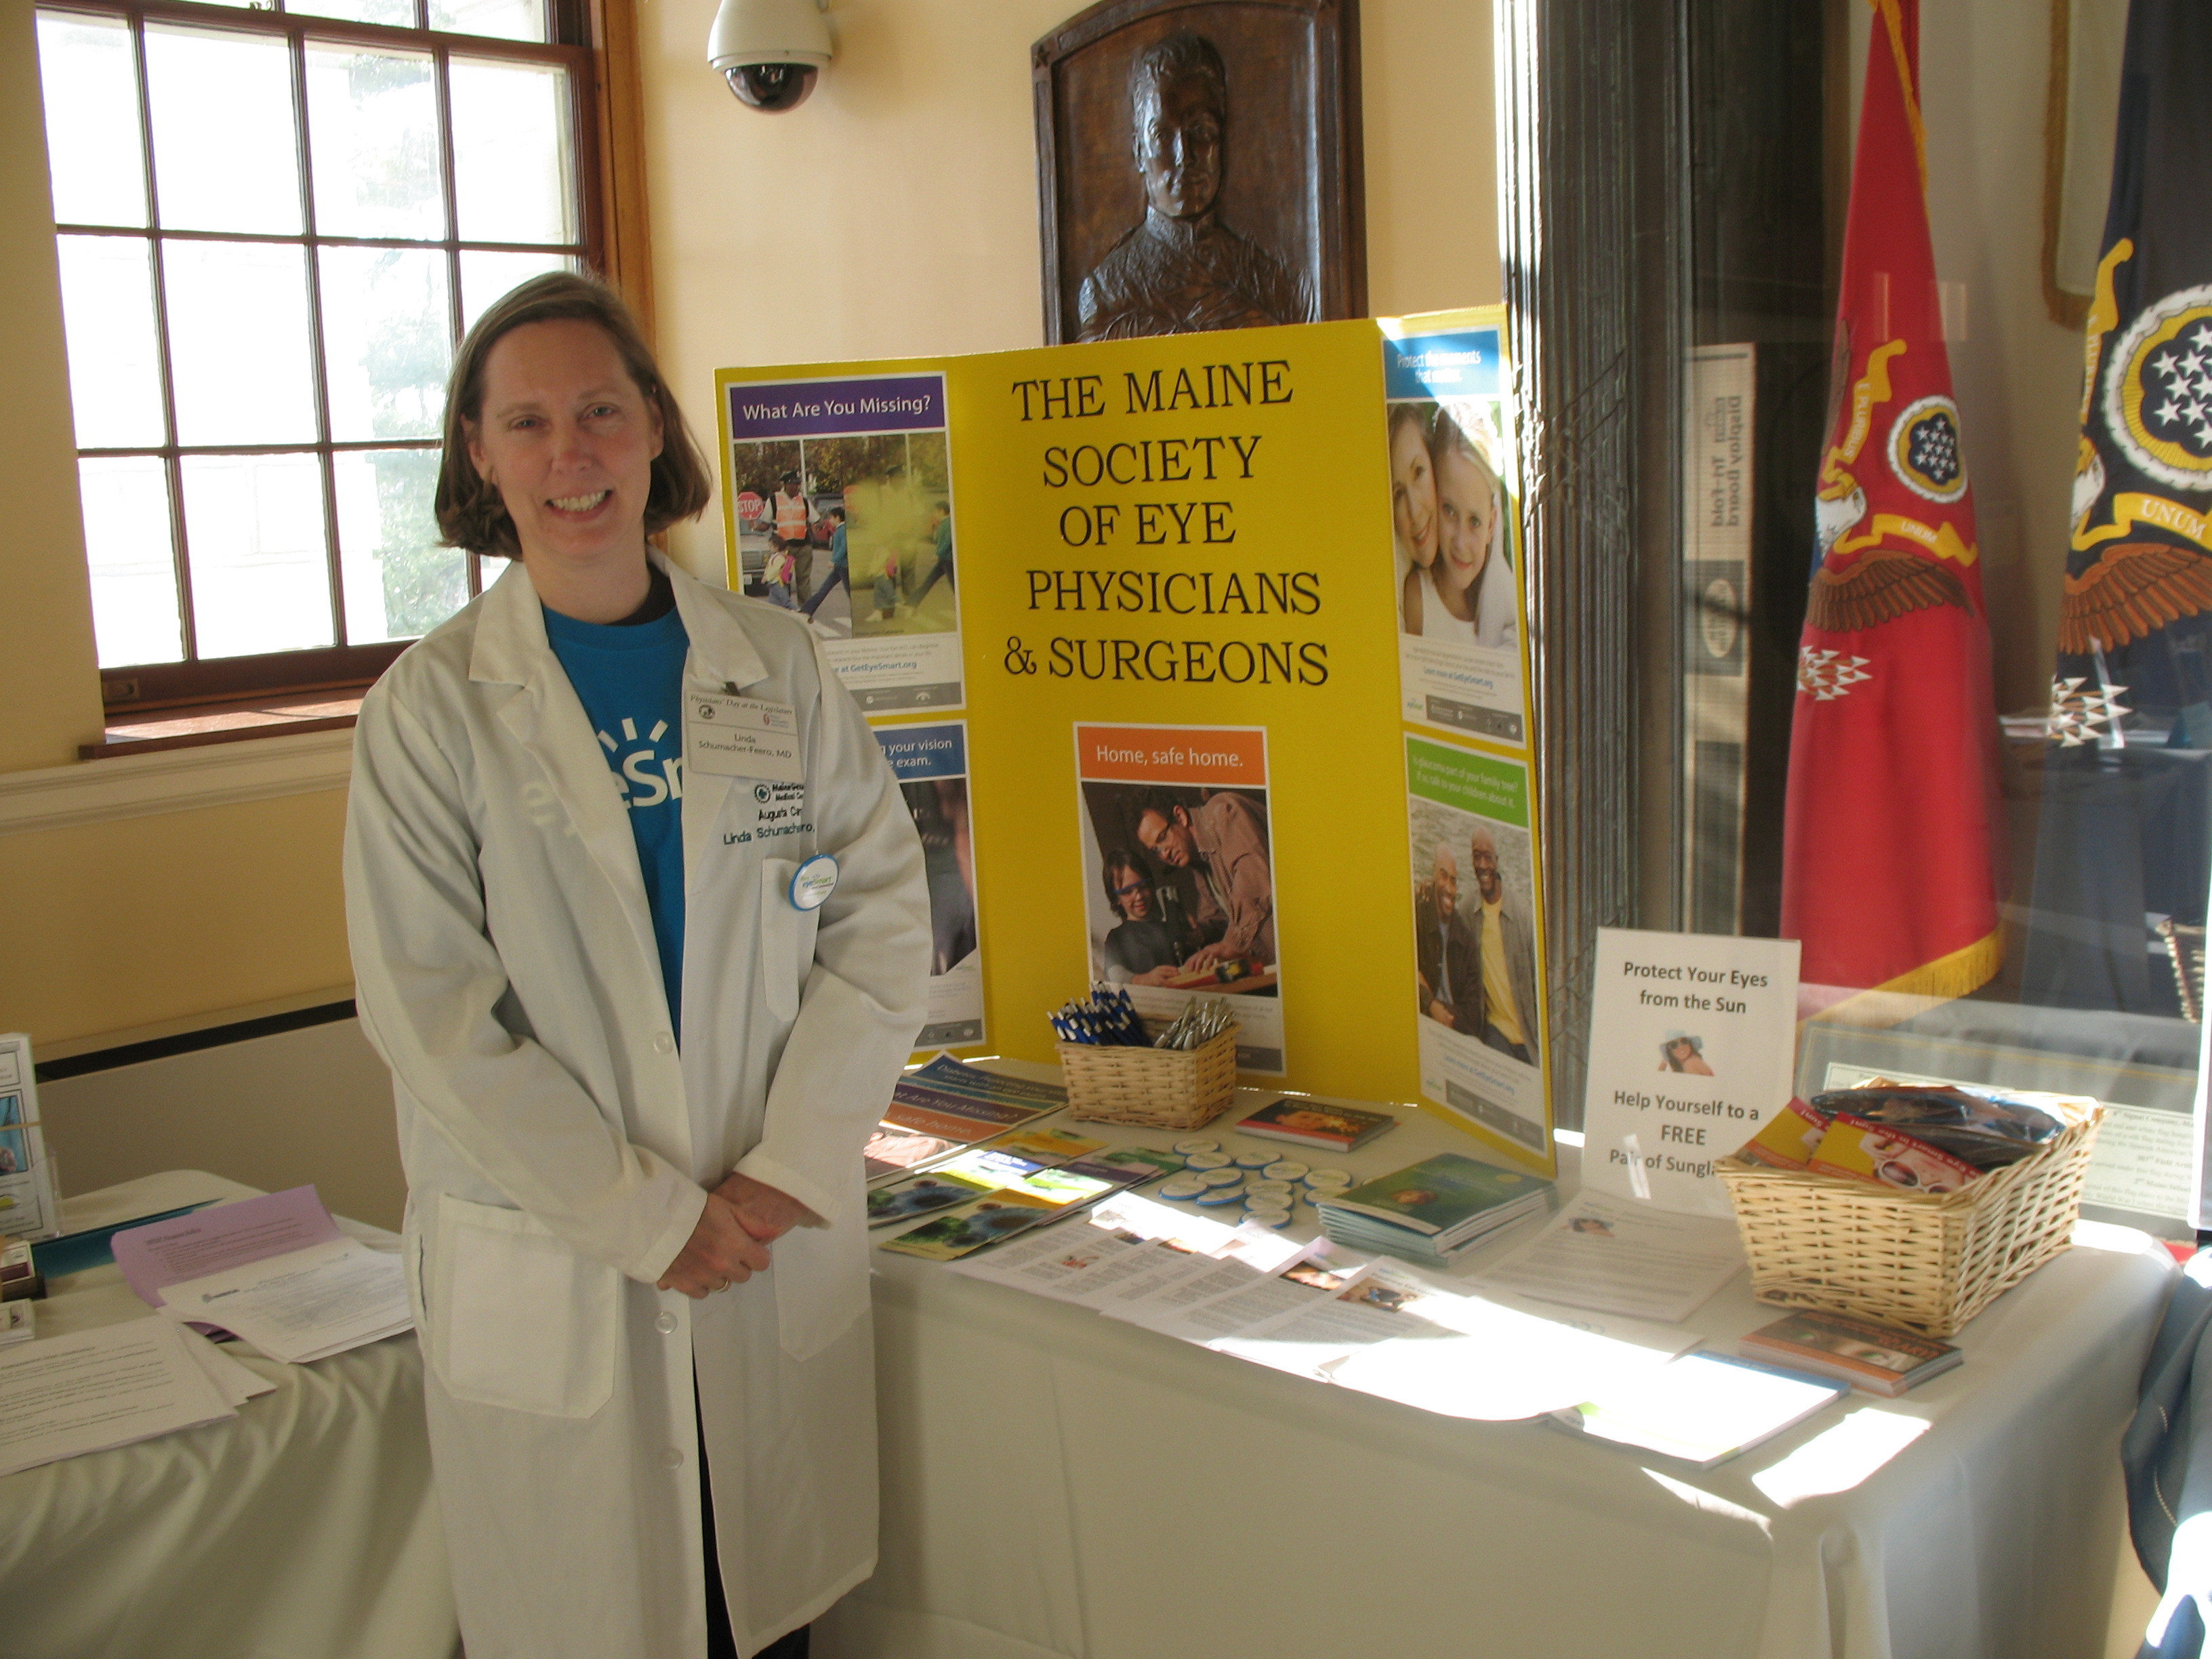 Linda Schumacher Feero, MD, President, Maine Society of Eye Physicians and Surgeons at MSEPS Display Booth